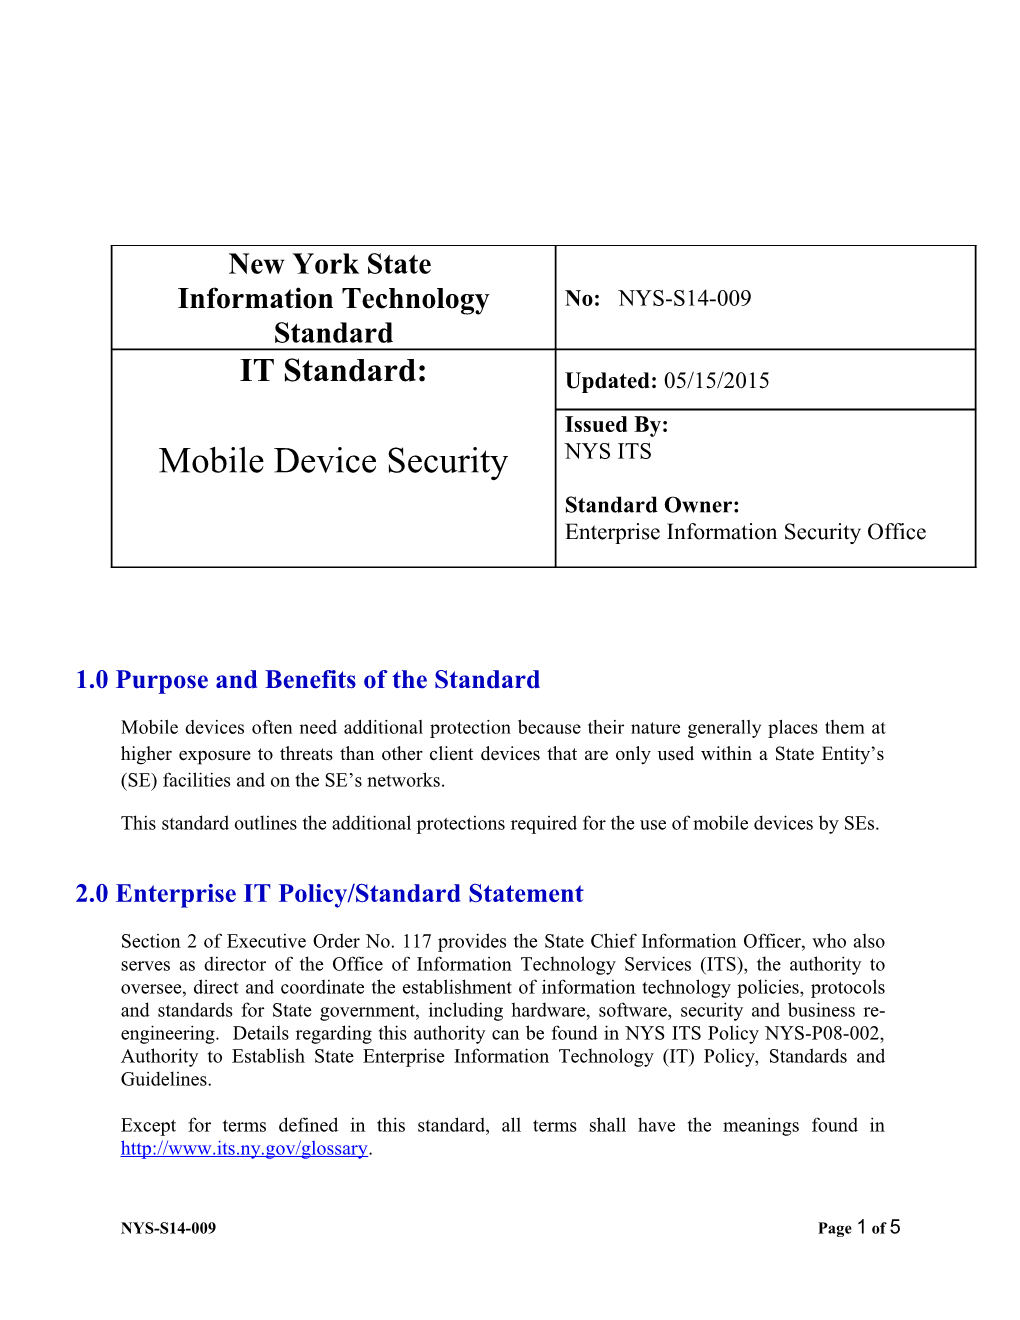 This Standard Outlines the Additional Protections Required for the Use of Mobile Devices by Ses